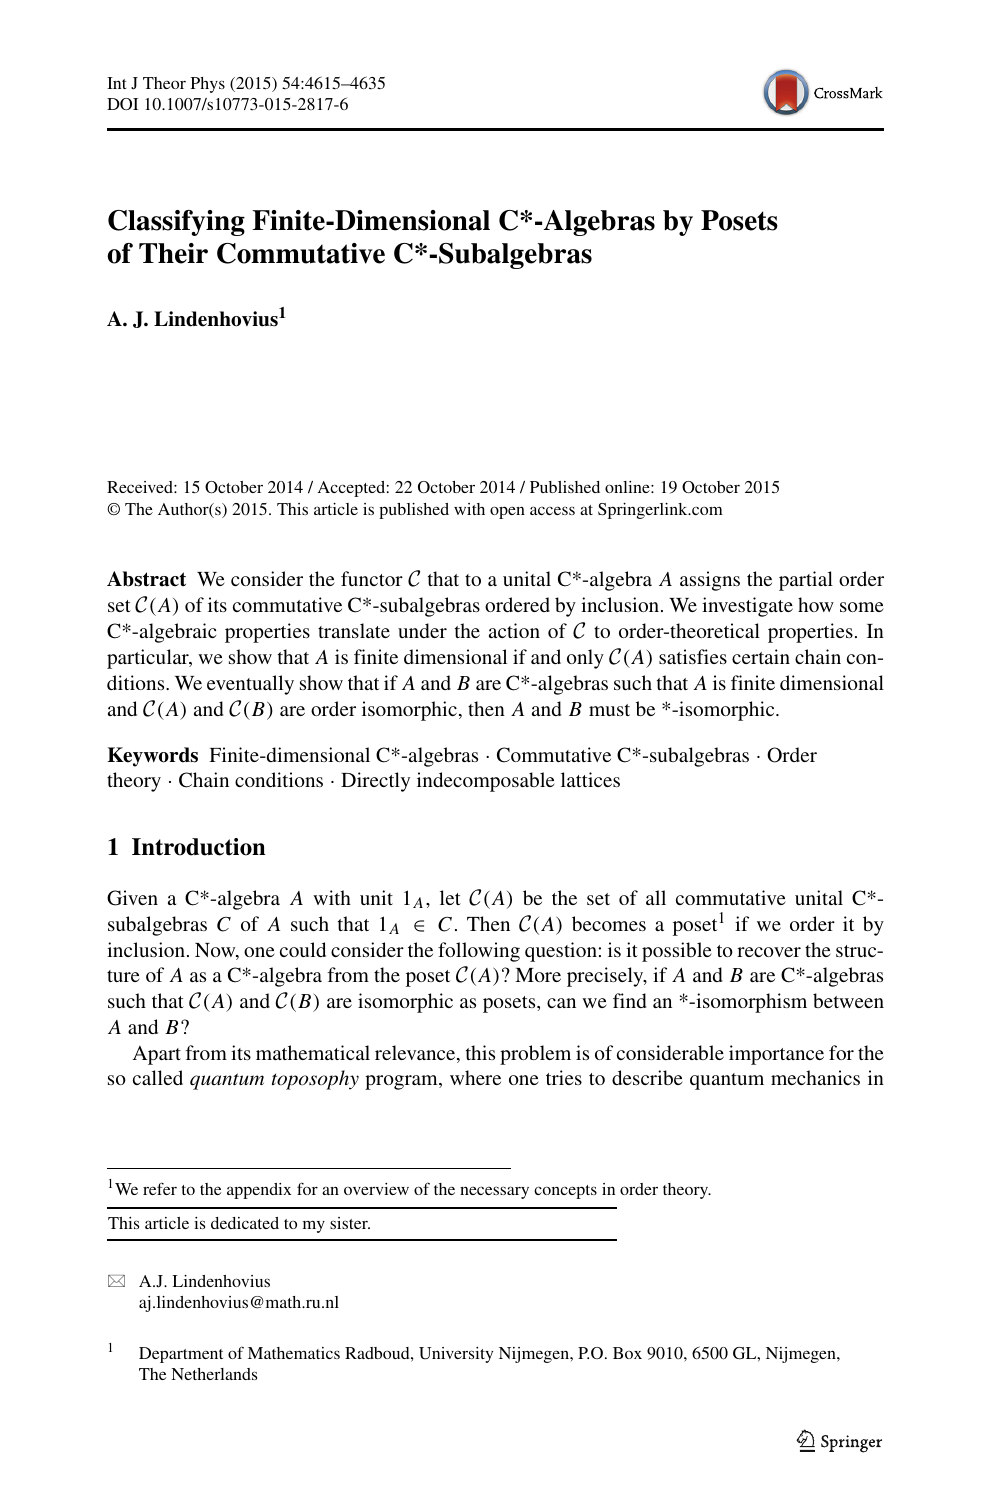 Classifying Finite Dimensional C Algebras By Posets Of Their Commutative C Subalgebras Topic Of Research Paper In Mathematics Download Scholarly Article Pdf And Read For Free On Cyberleninka Open Science Hub